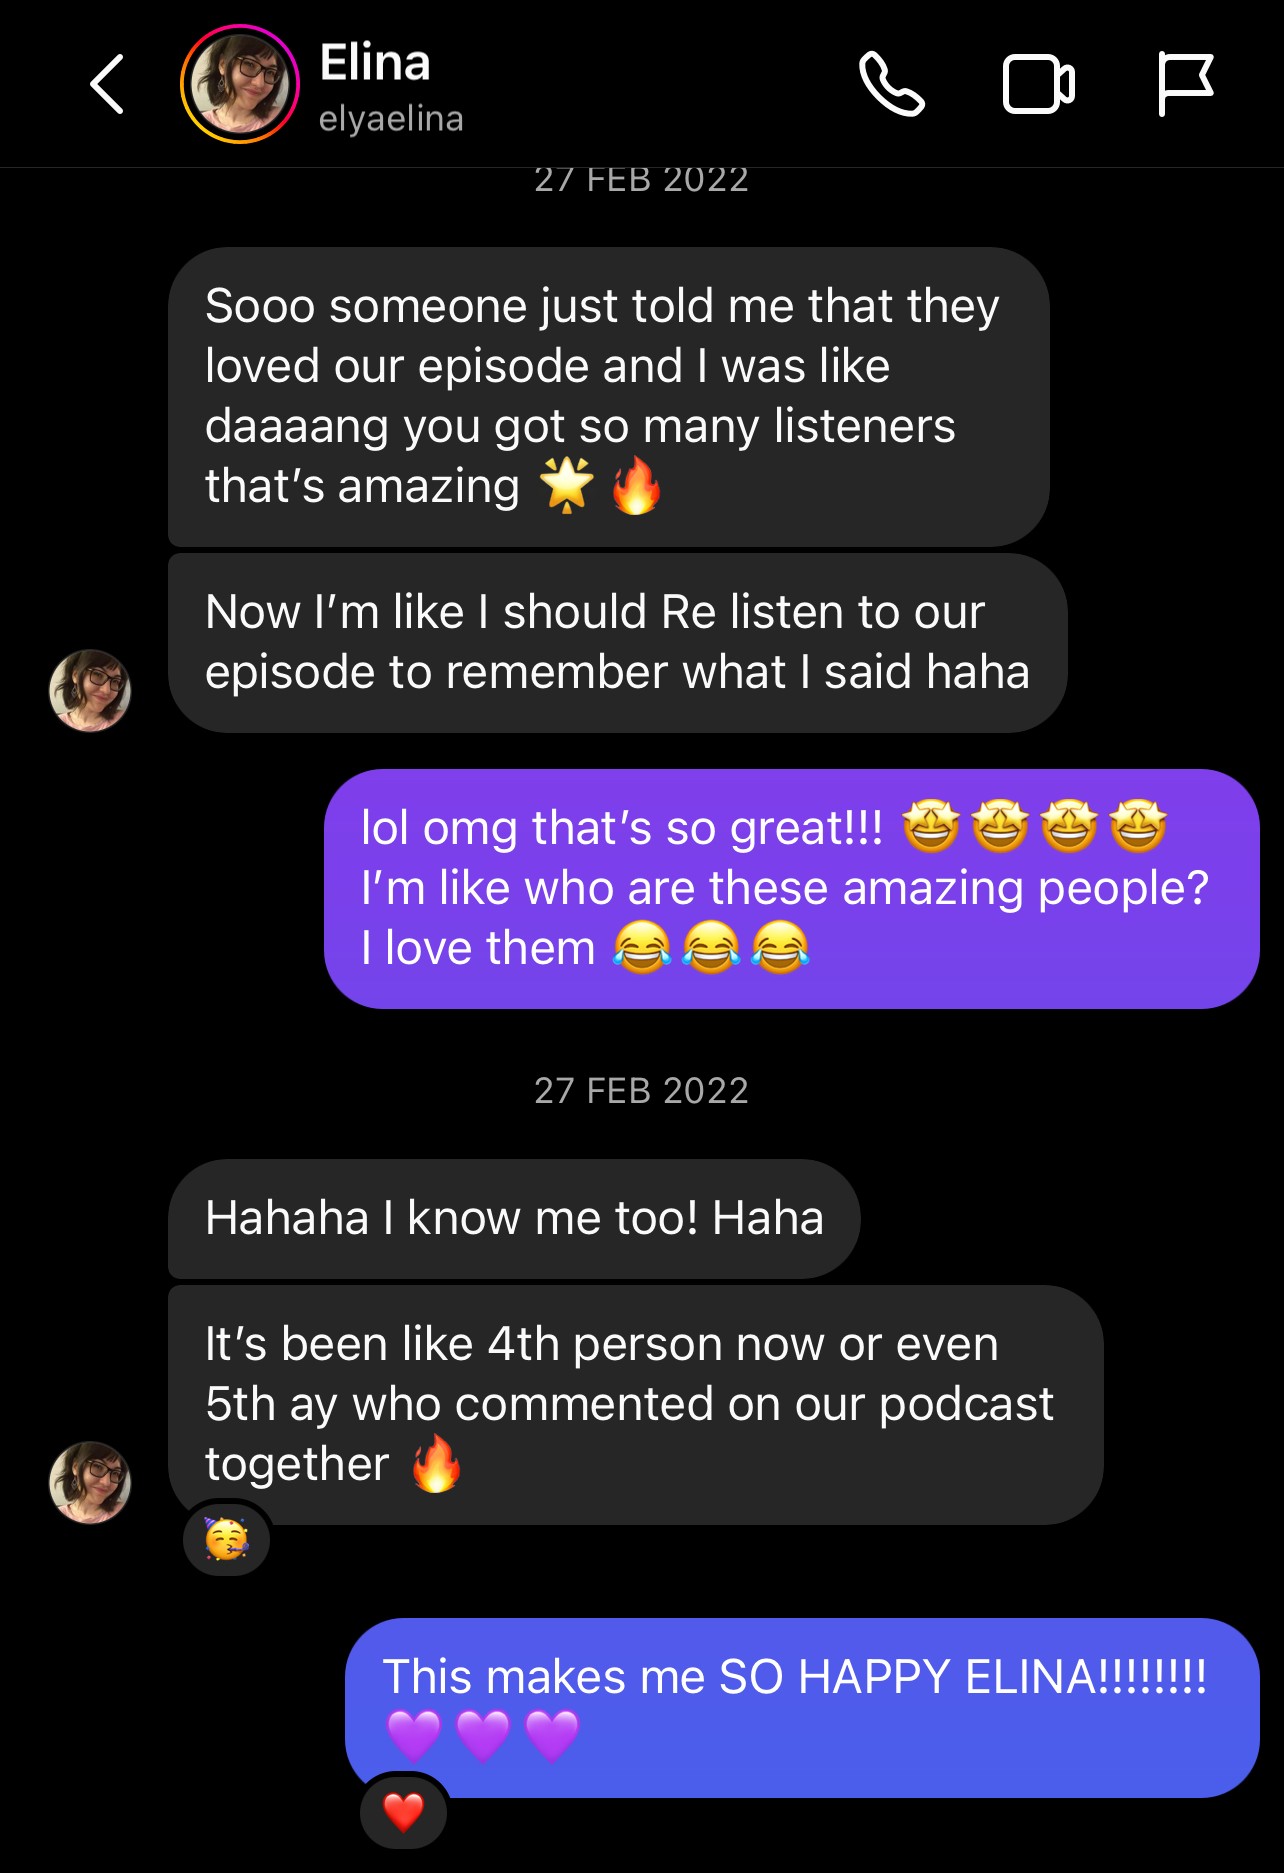 Conversation where Elina shares that someone has loved the episode they did together